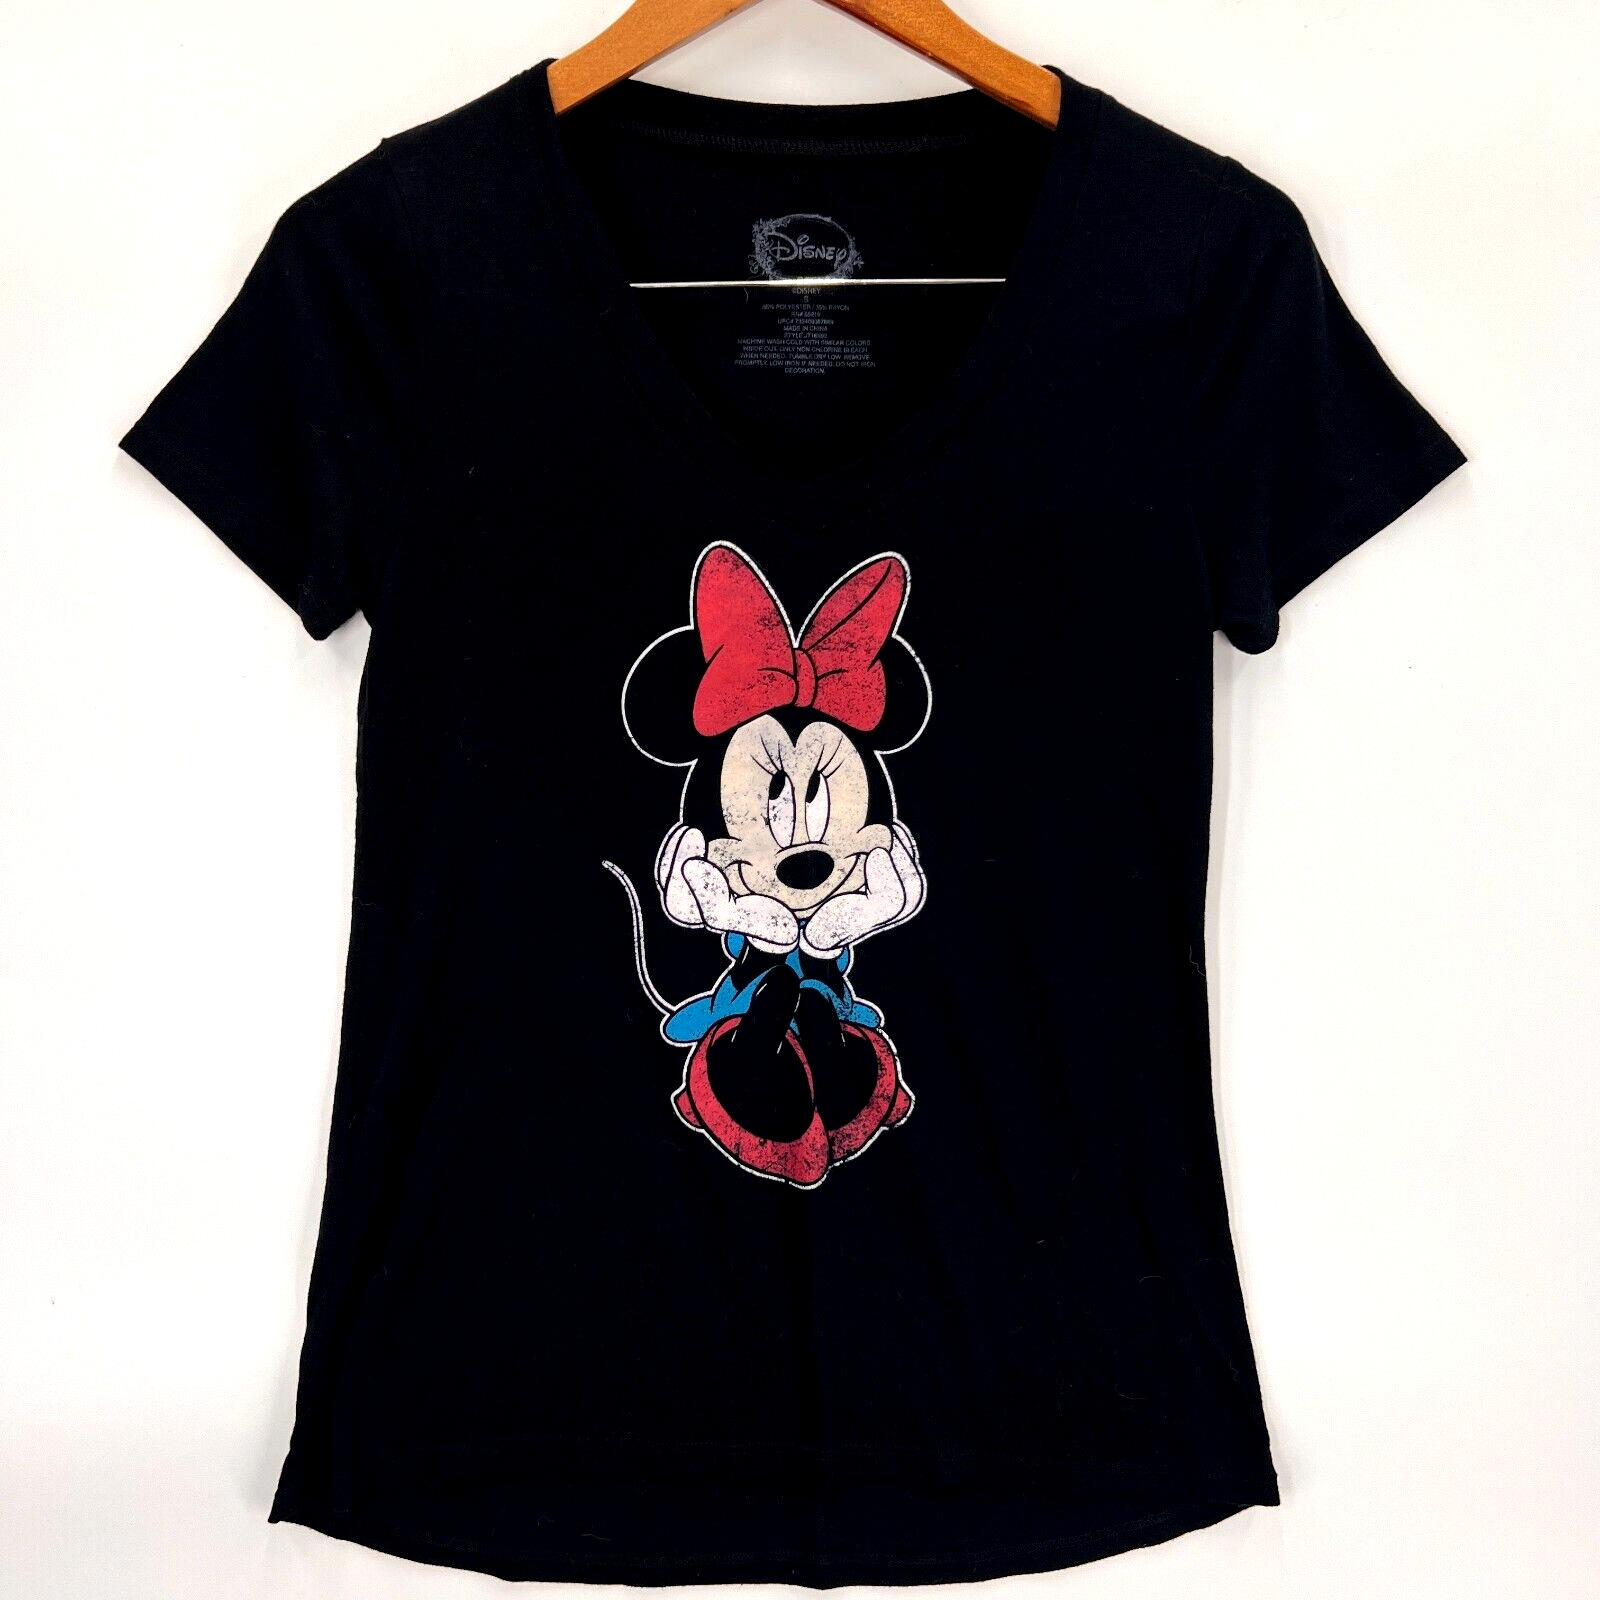 Disney Women\'s Casual Black Short Sleeve Graphic Minnie Mouse T-Shirt Size Small